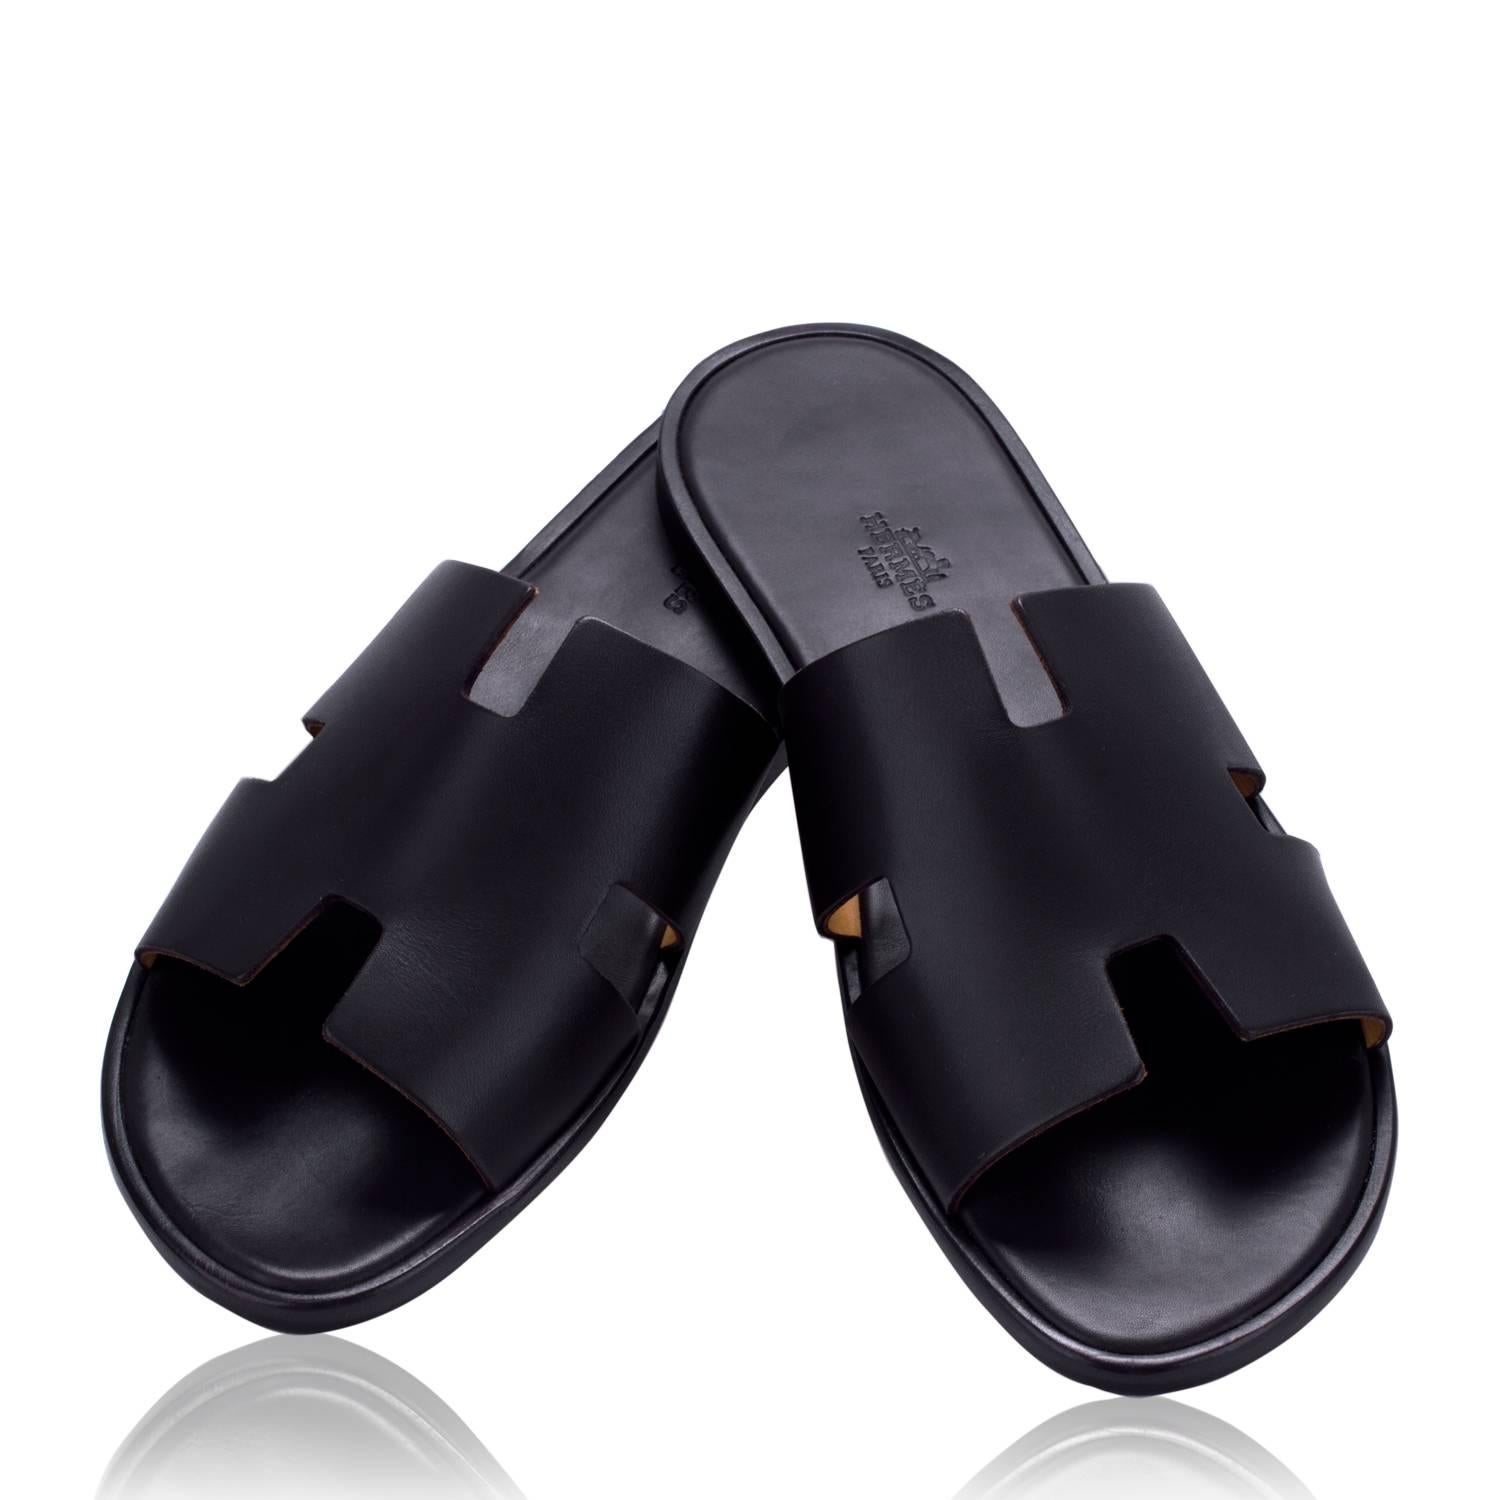 Hermes Men Sandals Izmir Veau Leather Black Color 43 Size 2016

Pristine condition. Pre-owned and never used. 
With the original Hermes box and the two dust bag protection.
Bought it in Hermes store in 2016.

The price of this item on Boutique